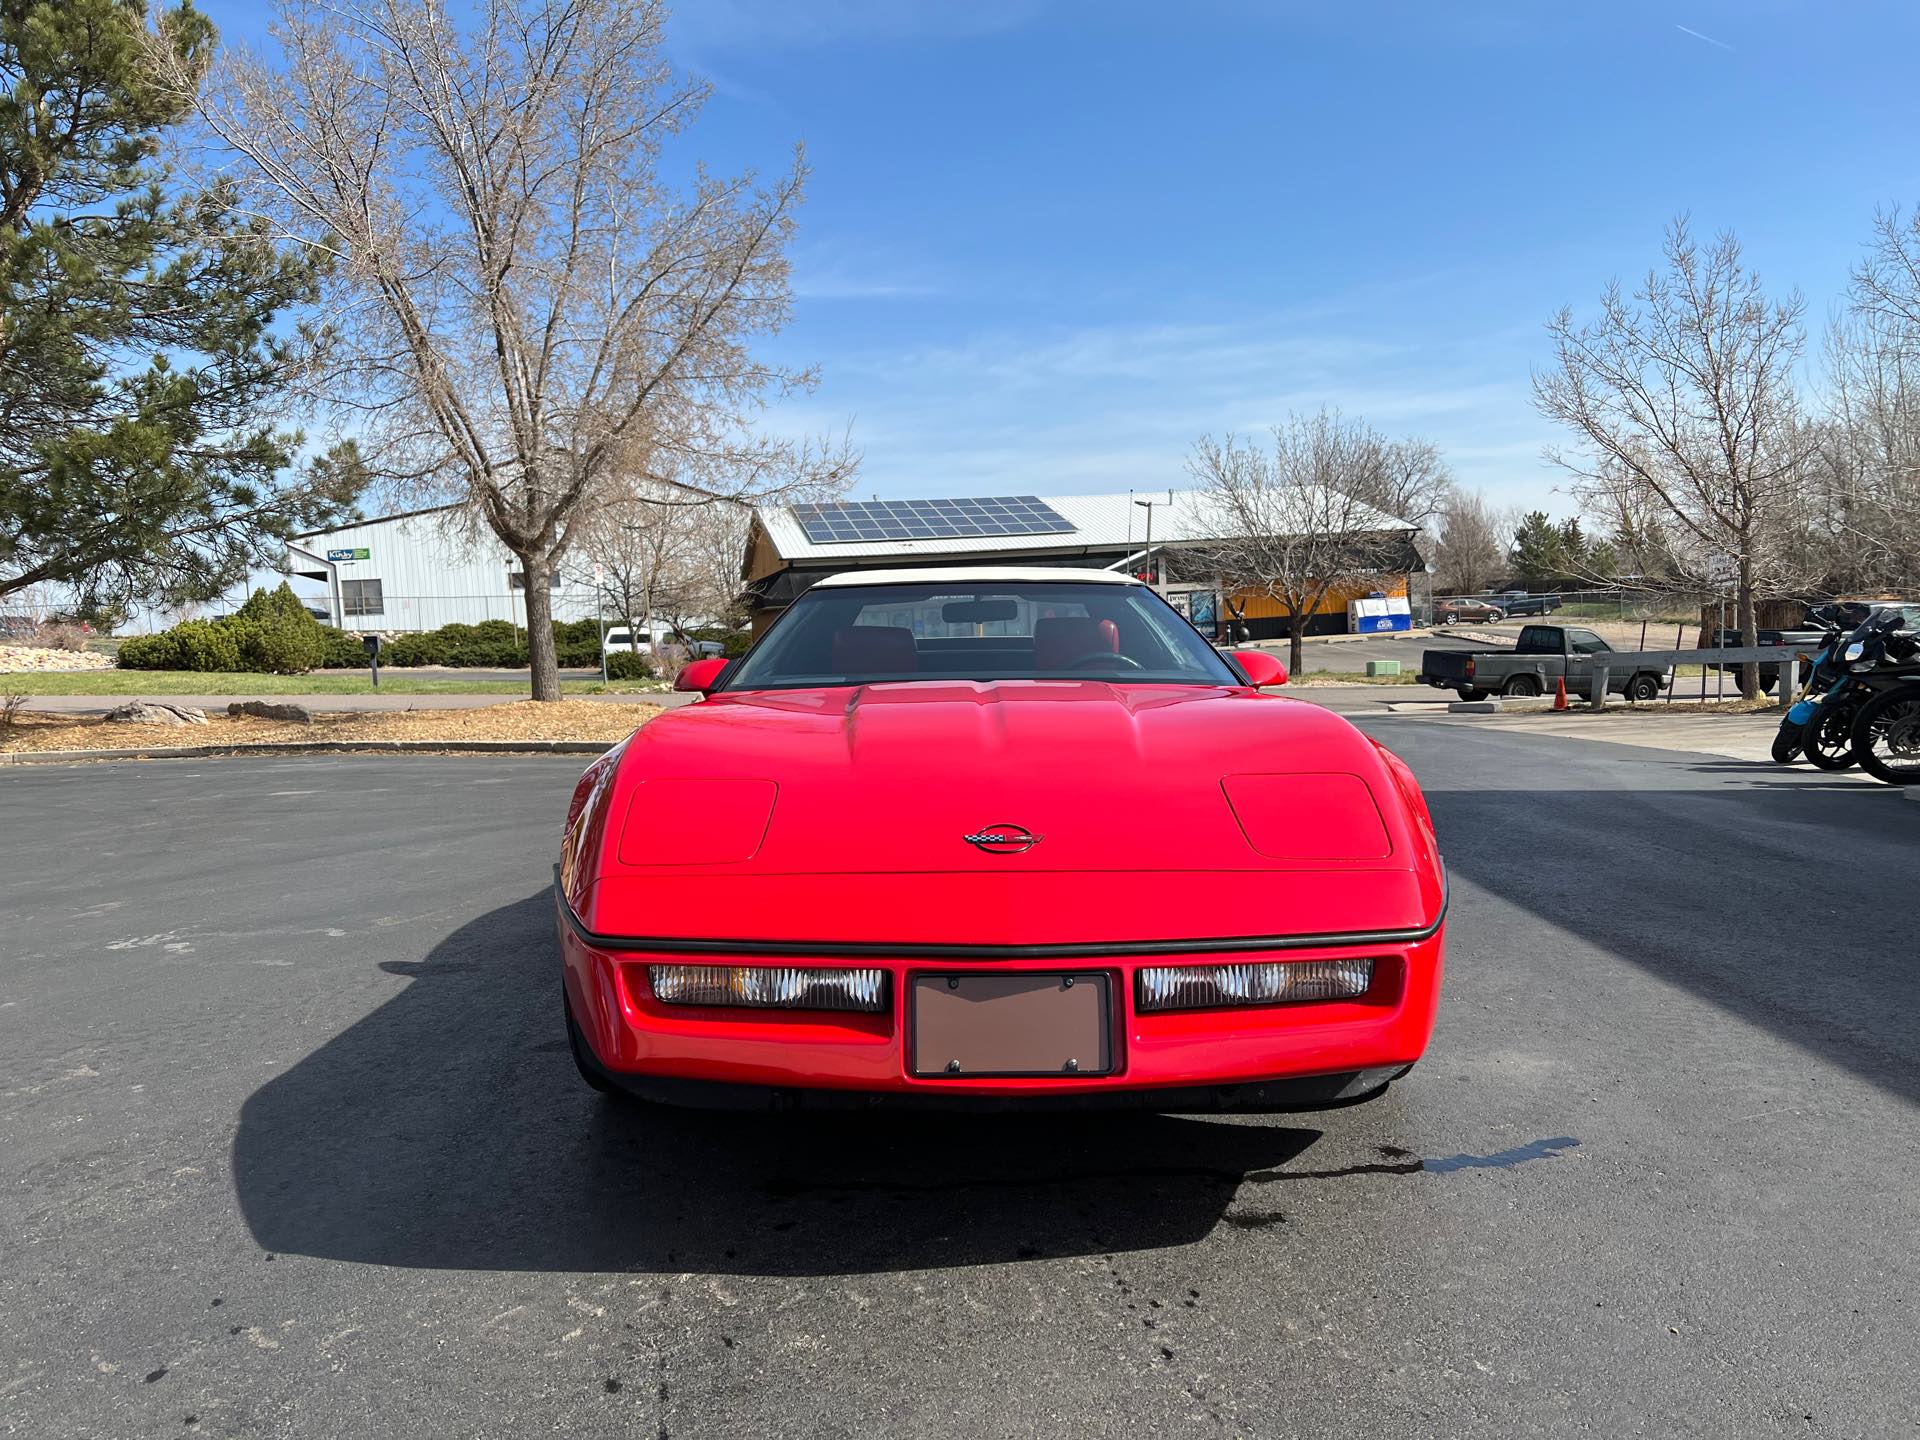 1989 CHEVROLET Corvette at Aces Motorcycles - Fort Collins